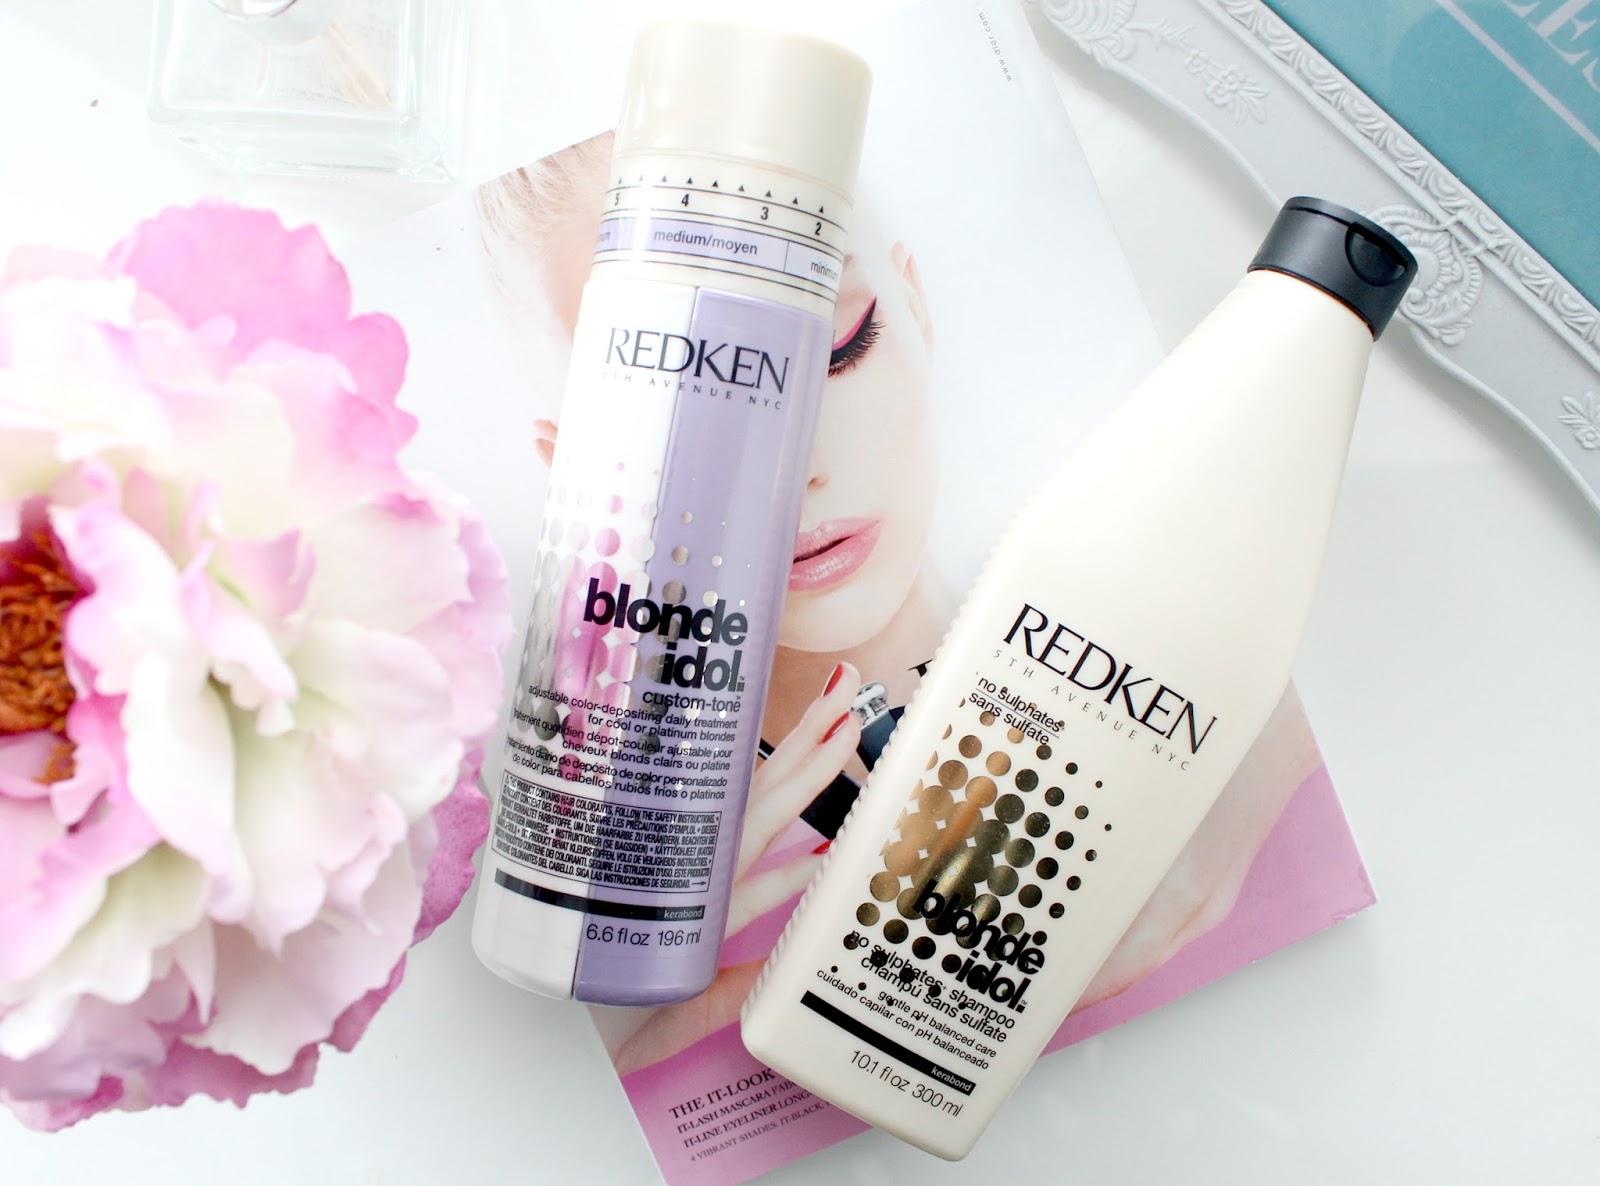 2. Redken Blonde Idol Custom-Tone Conditioner for Cool Blondes - wide 8